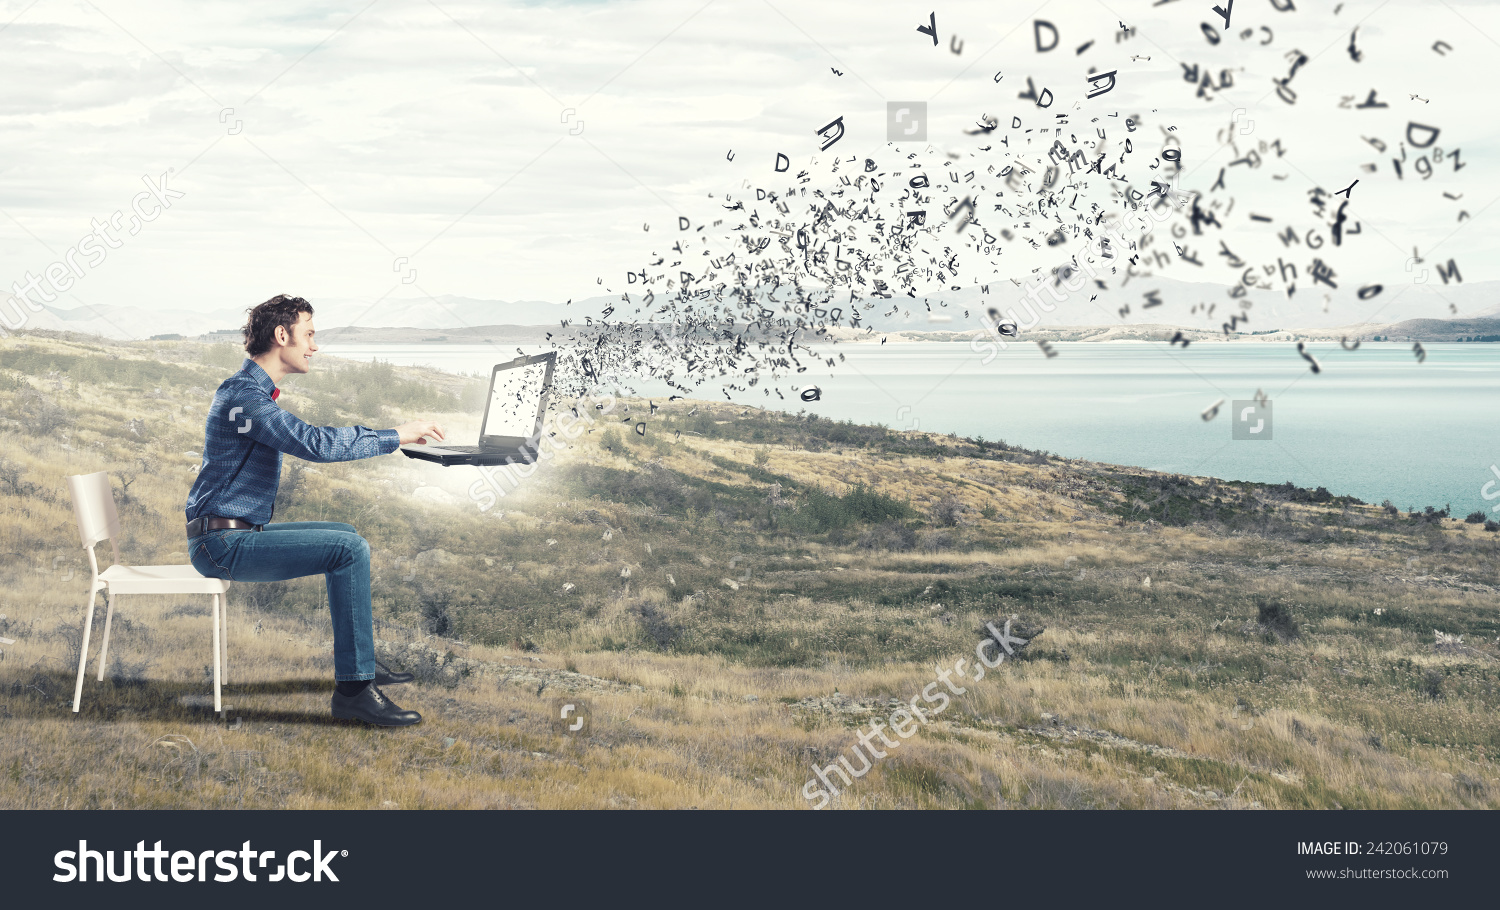 stock-photo-young-man-sitting-in-chair-and-using-laptop-242061079